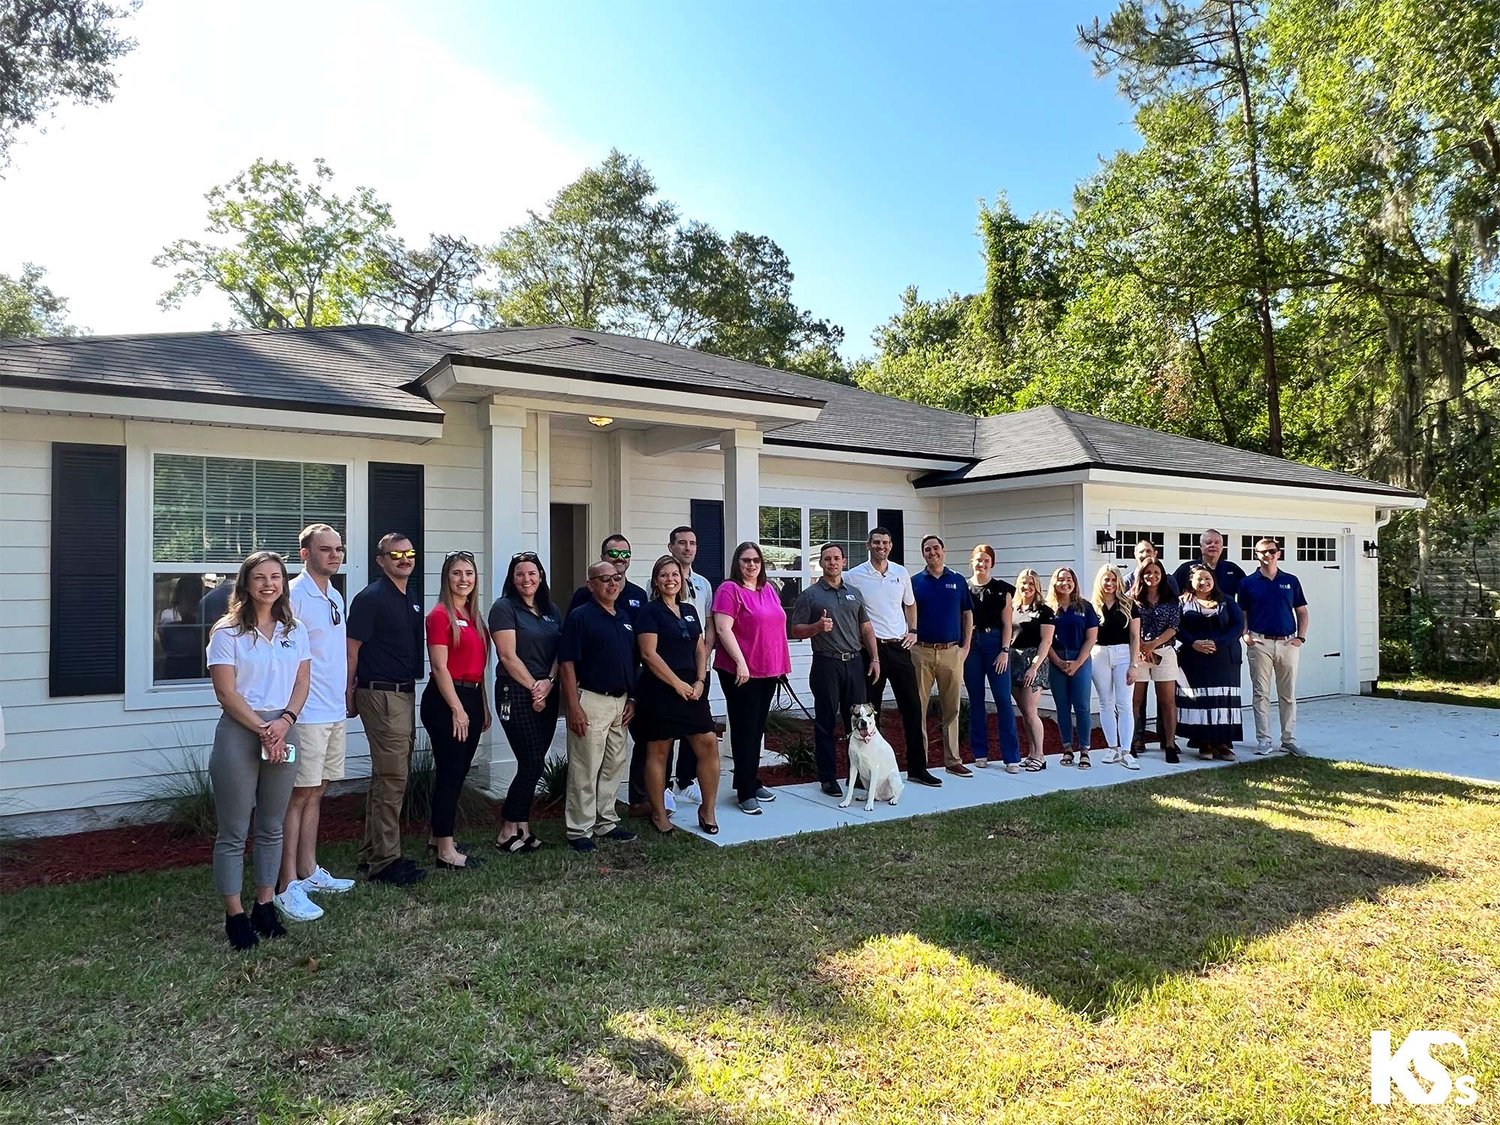 Army veteran Jennifer Andreasen was presented with a new home thanks to a partnership between K9s For Warriors and JWB Real Estate Capital.